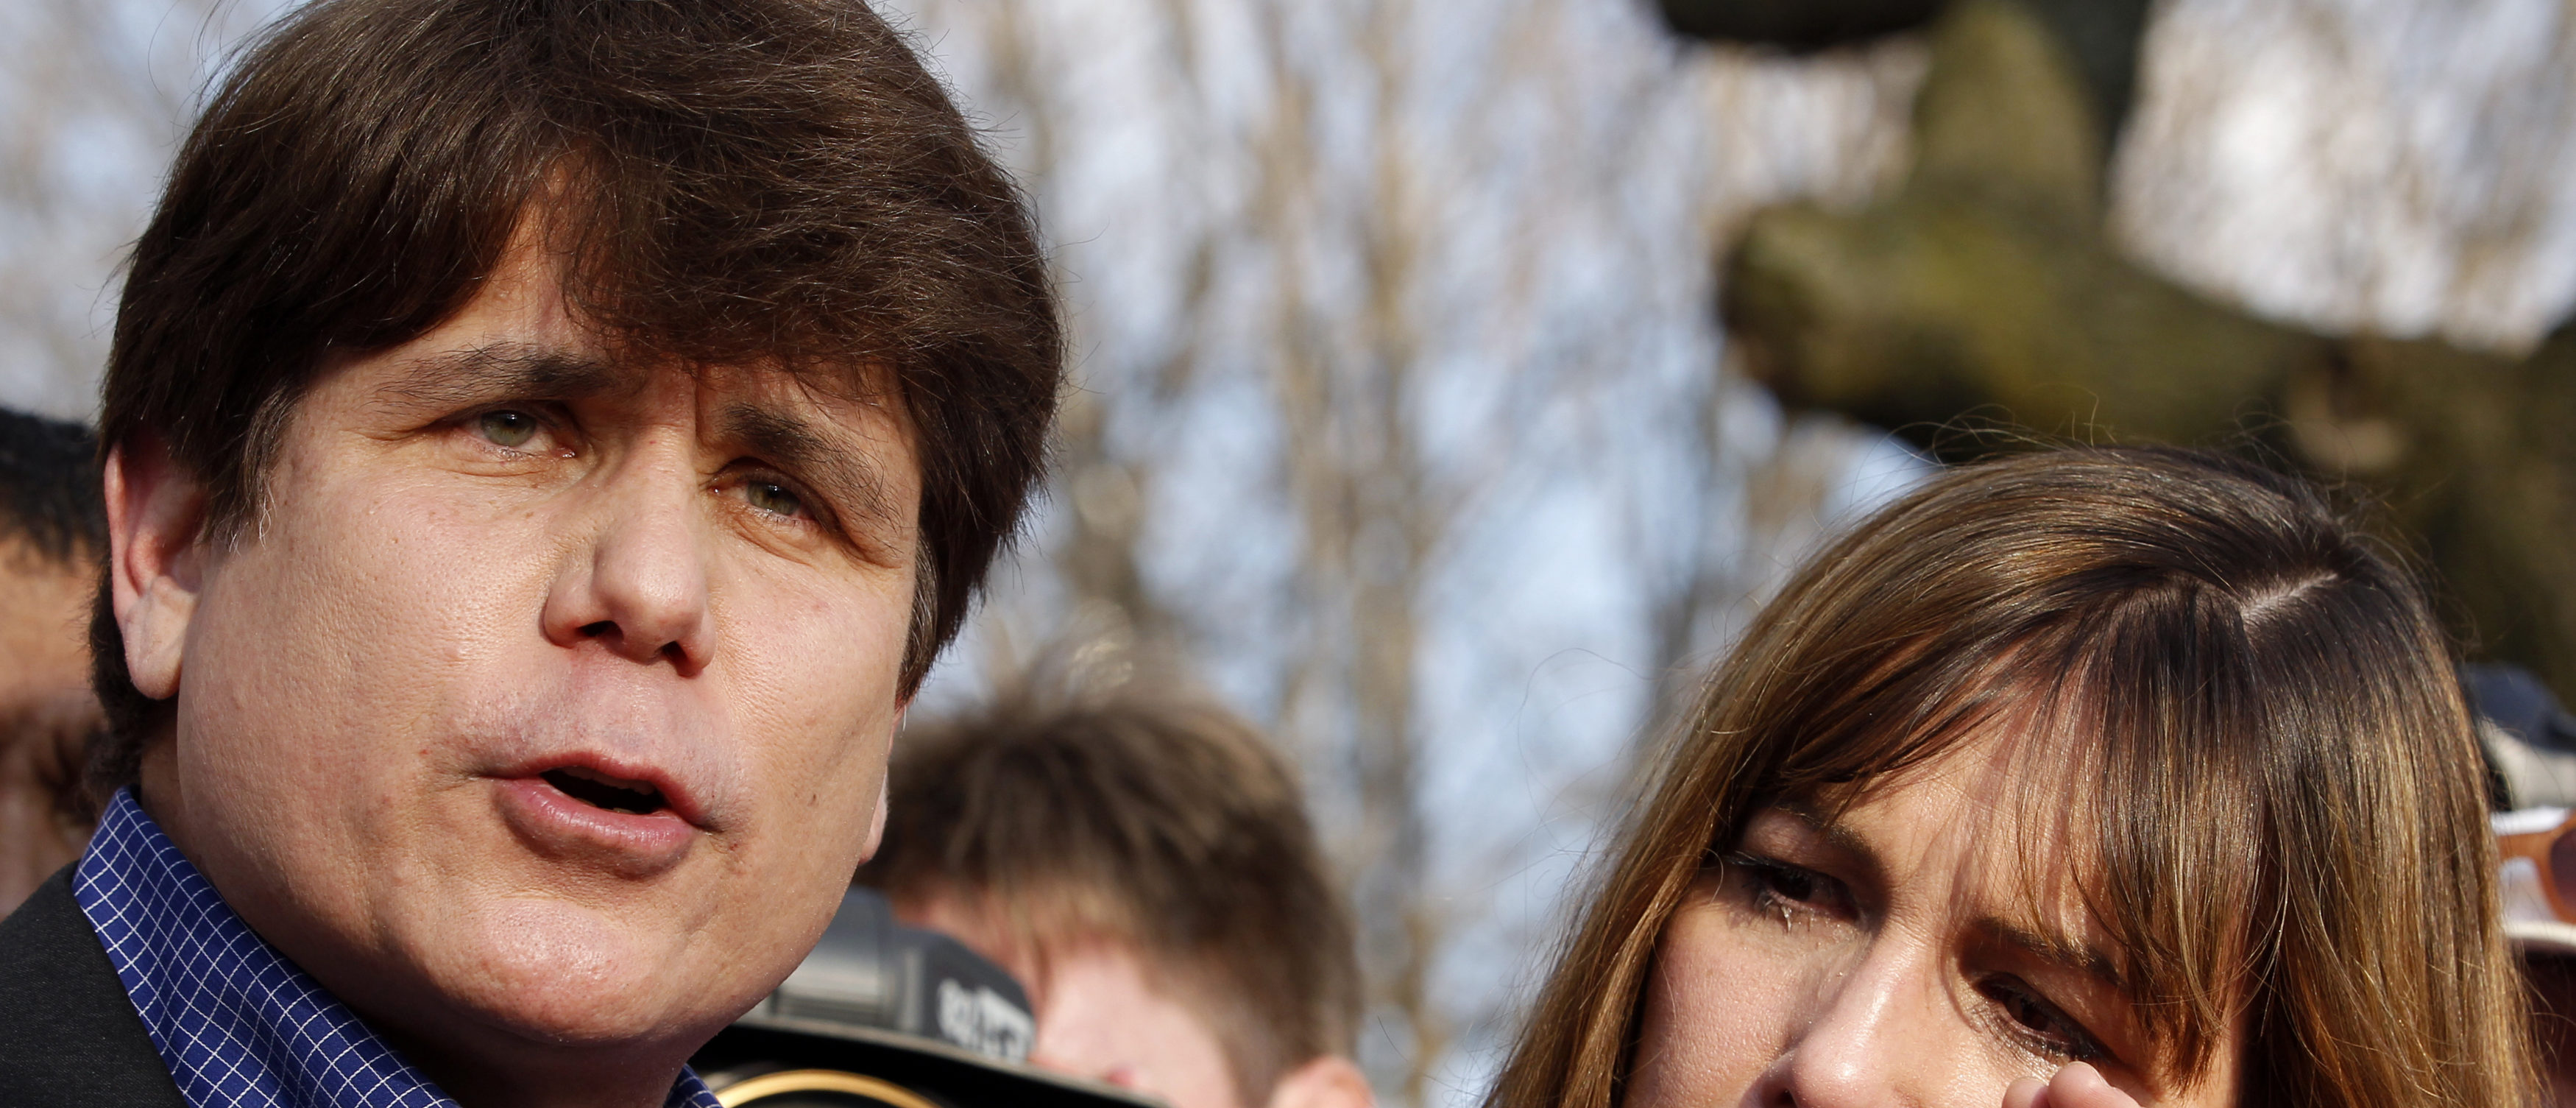 Former Governor of Illinois Rod Blagojevich, with his wife Patti, makes a statement to reporters outside his Chicago home one day before reporting to federal prison in Colorado to serve a 14-year sentence for corruption, March 14, 2012. REUTERS/Jeff Haynes